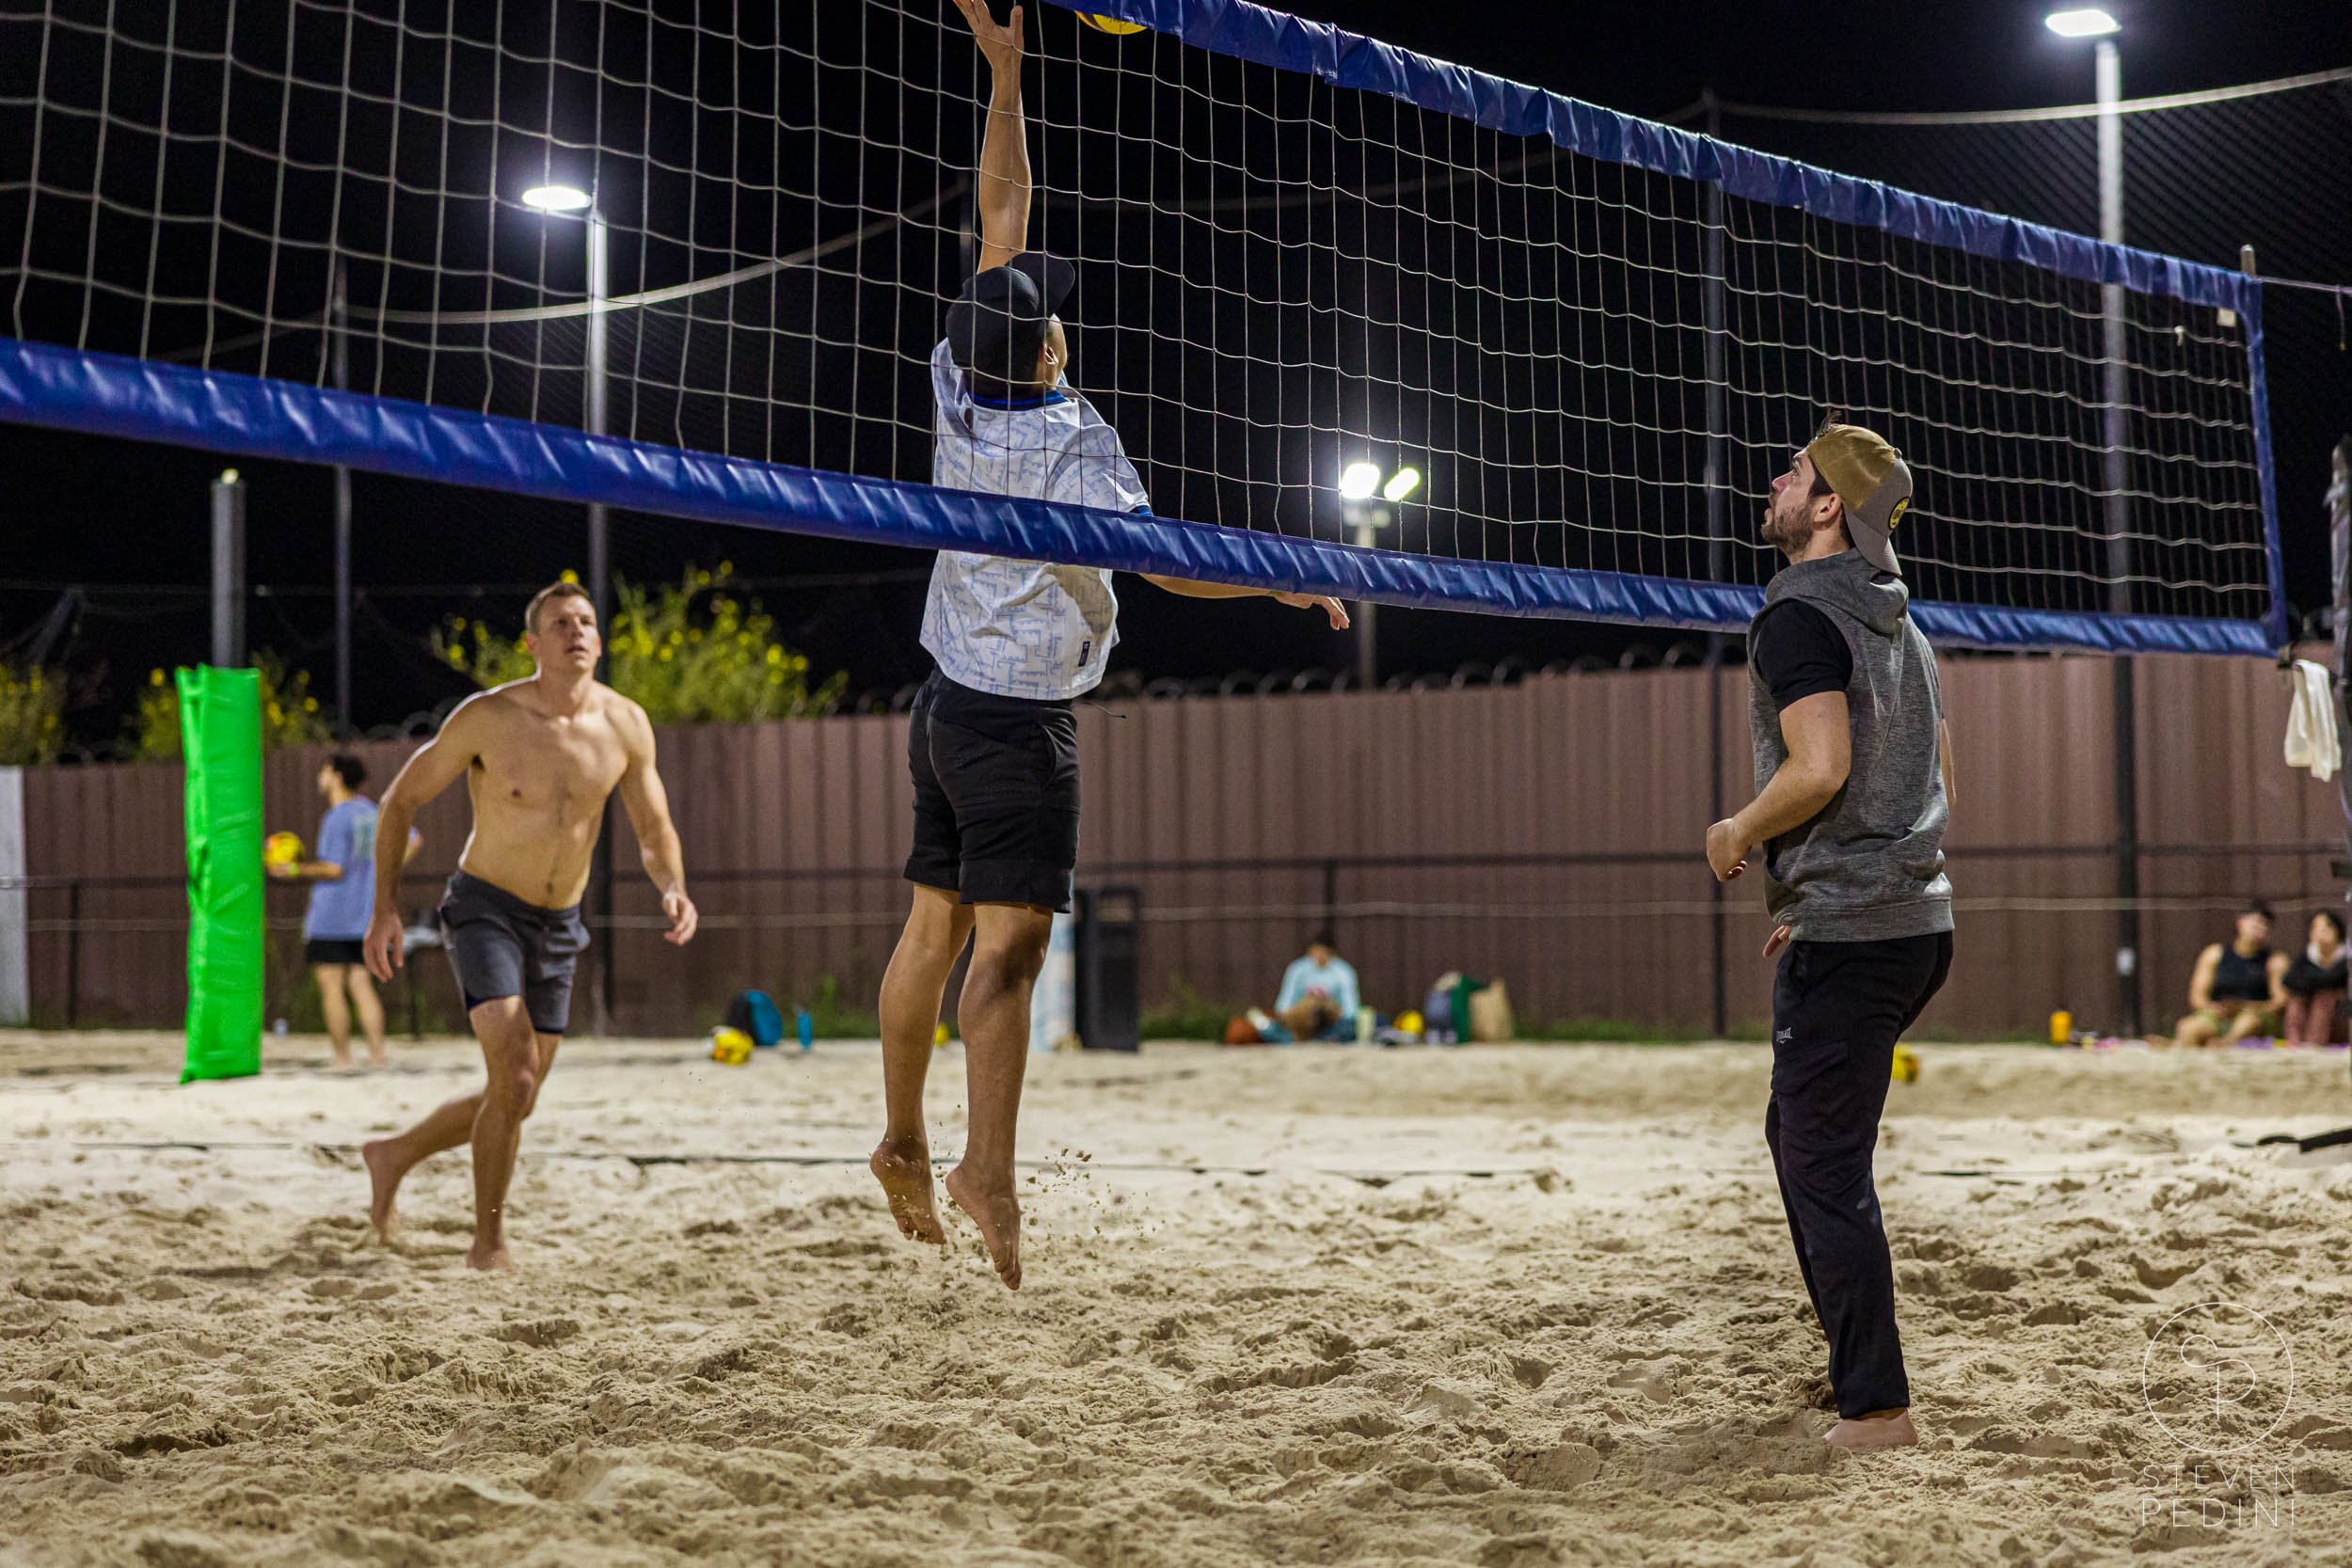 Steven Pedini Photography - Bumpy Pickle - Sand Volleyball - Houston TX - World Cup of Volleyball - 00397.jpg